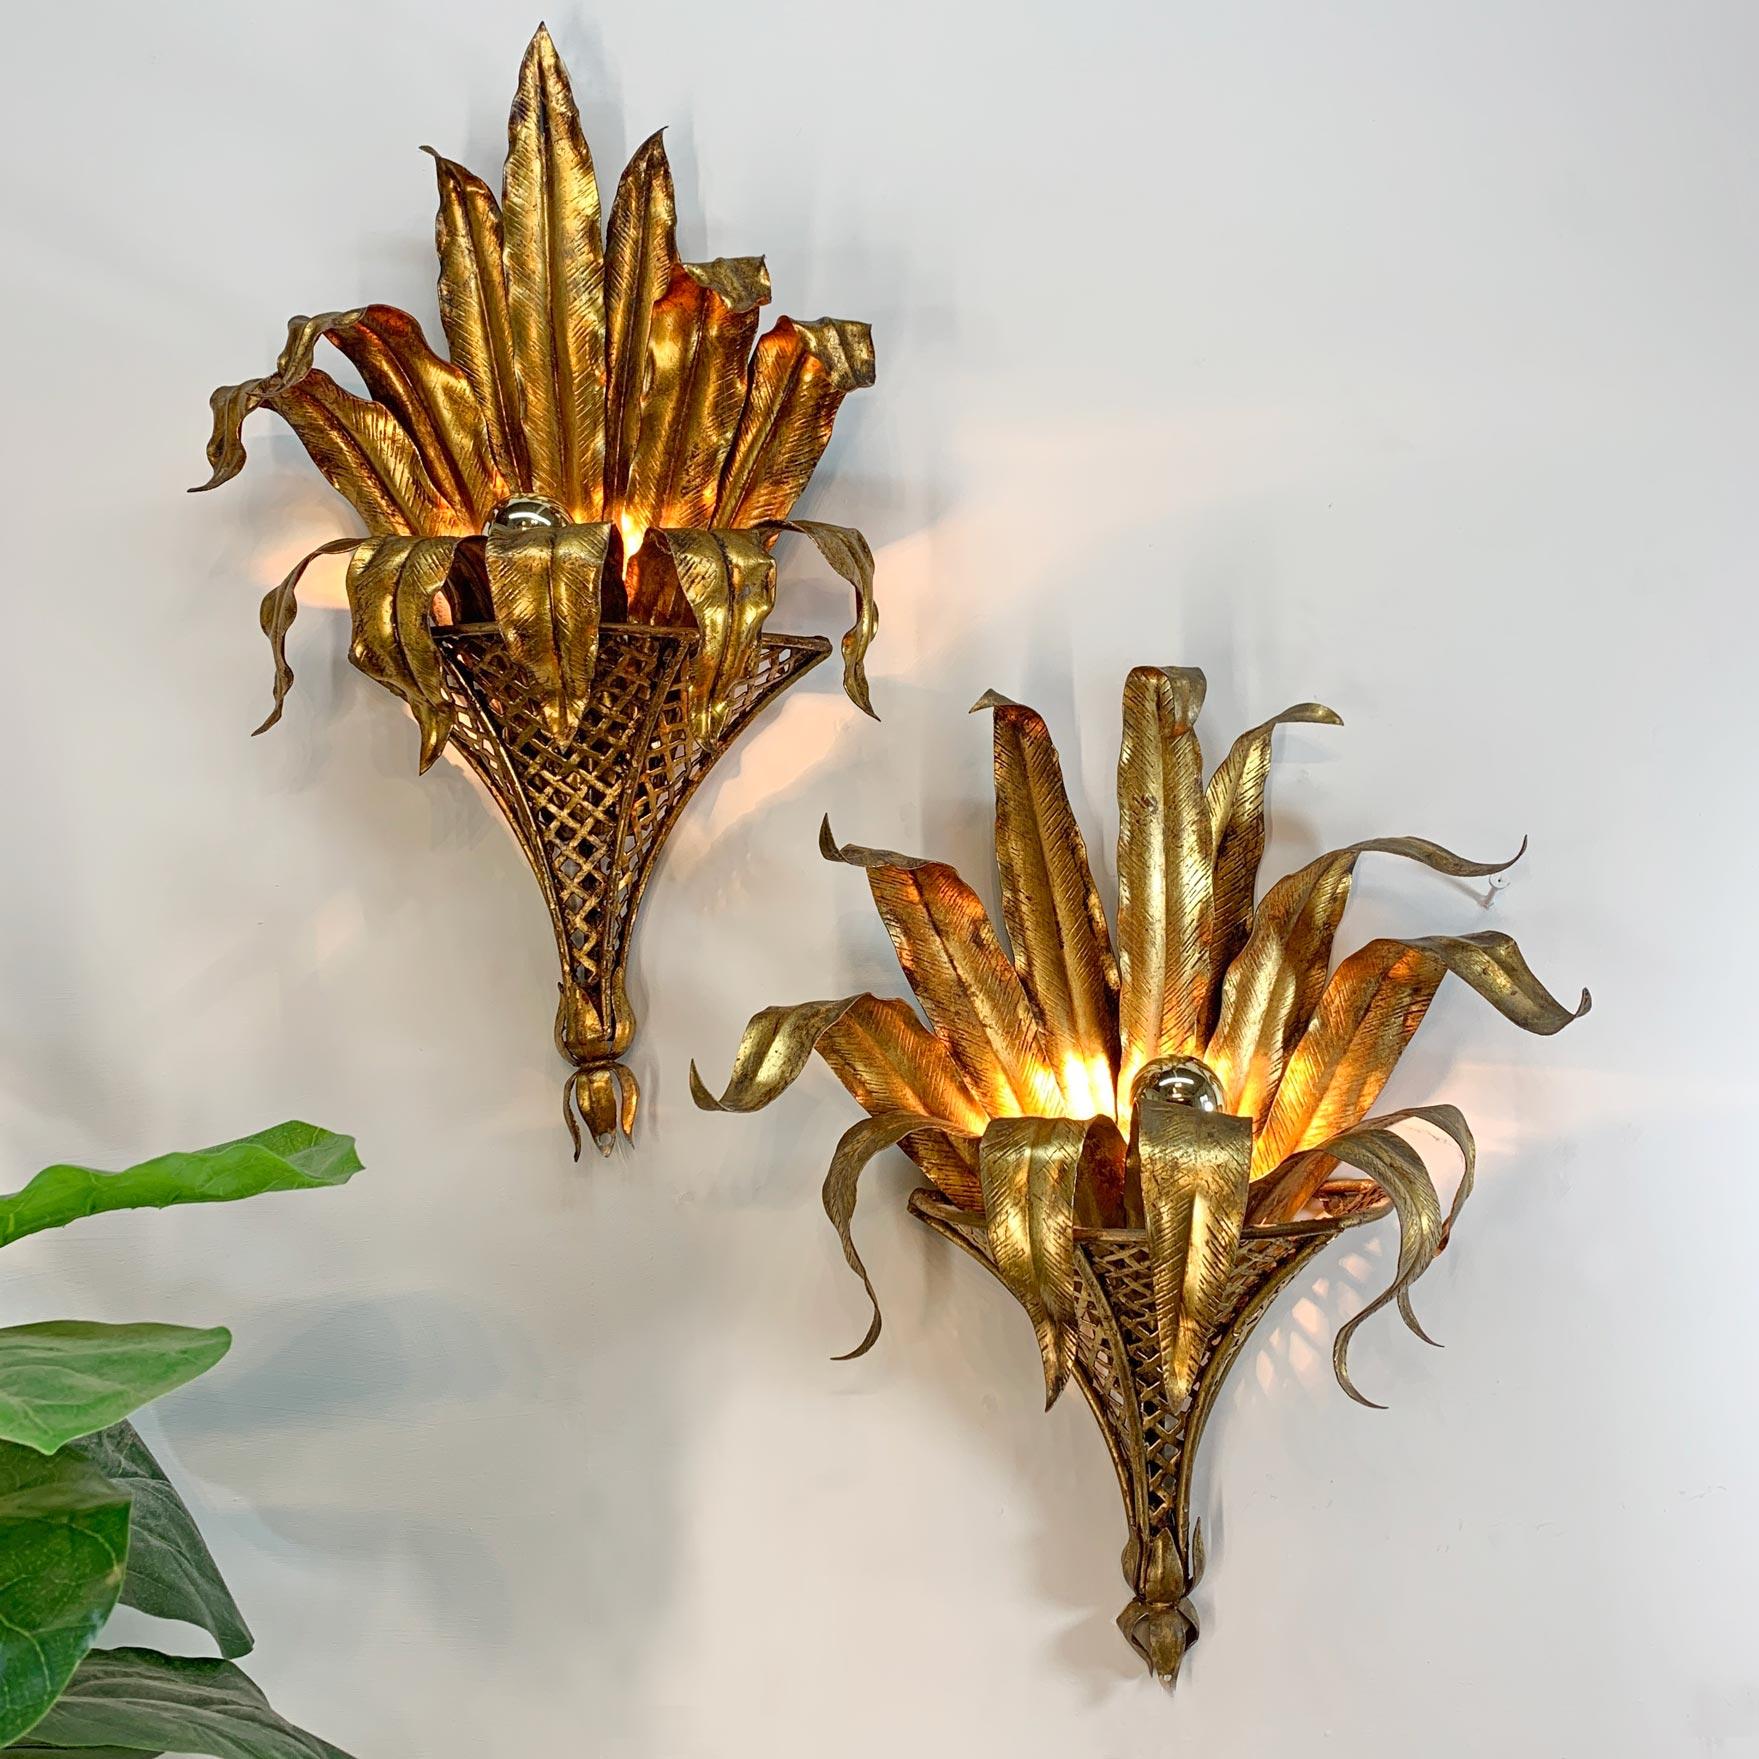 Fabulous pair of 1950’s Italian wall lights, the gilded iron modelled as large, outstretched palm leaves sitting within an upturned coronet. Slight difference in the gilt finish due to the hand-crafted nature of these stunning pieces.

Can be hard